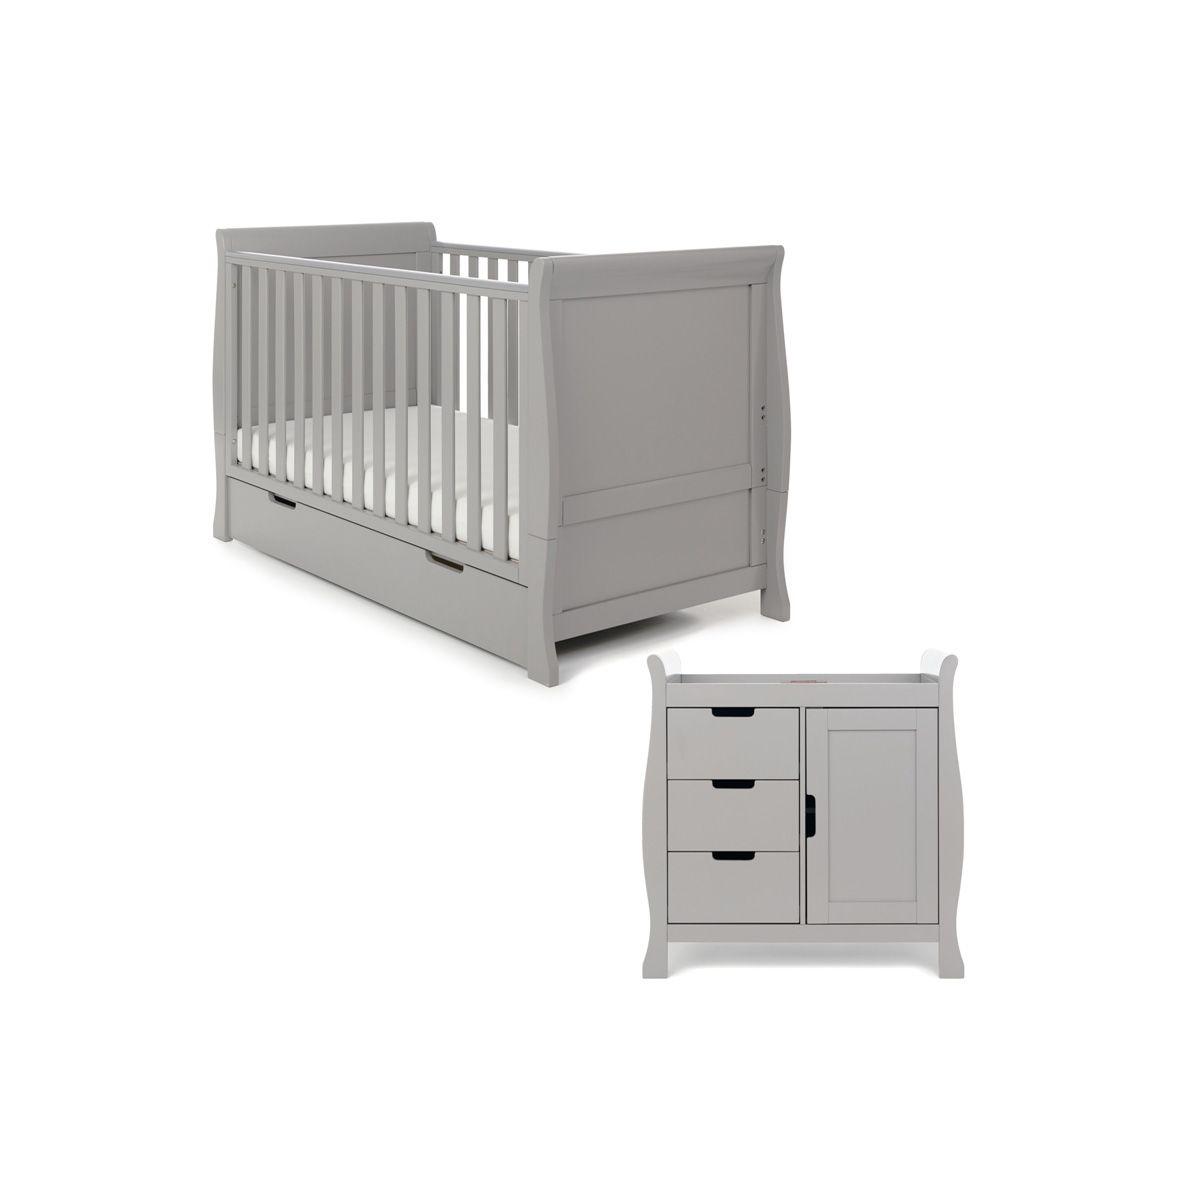 Obaby Stamford Classic Sleigh 2 Piece Furniture Roomset